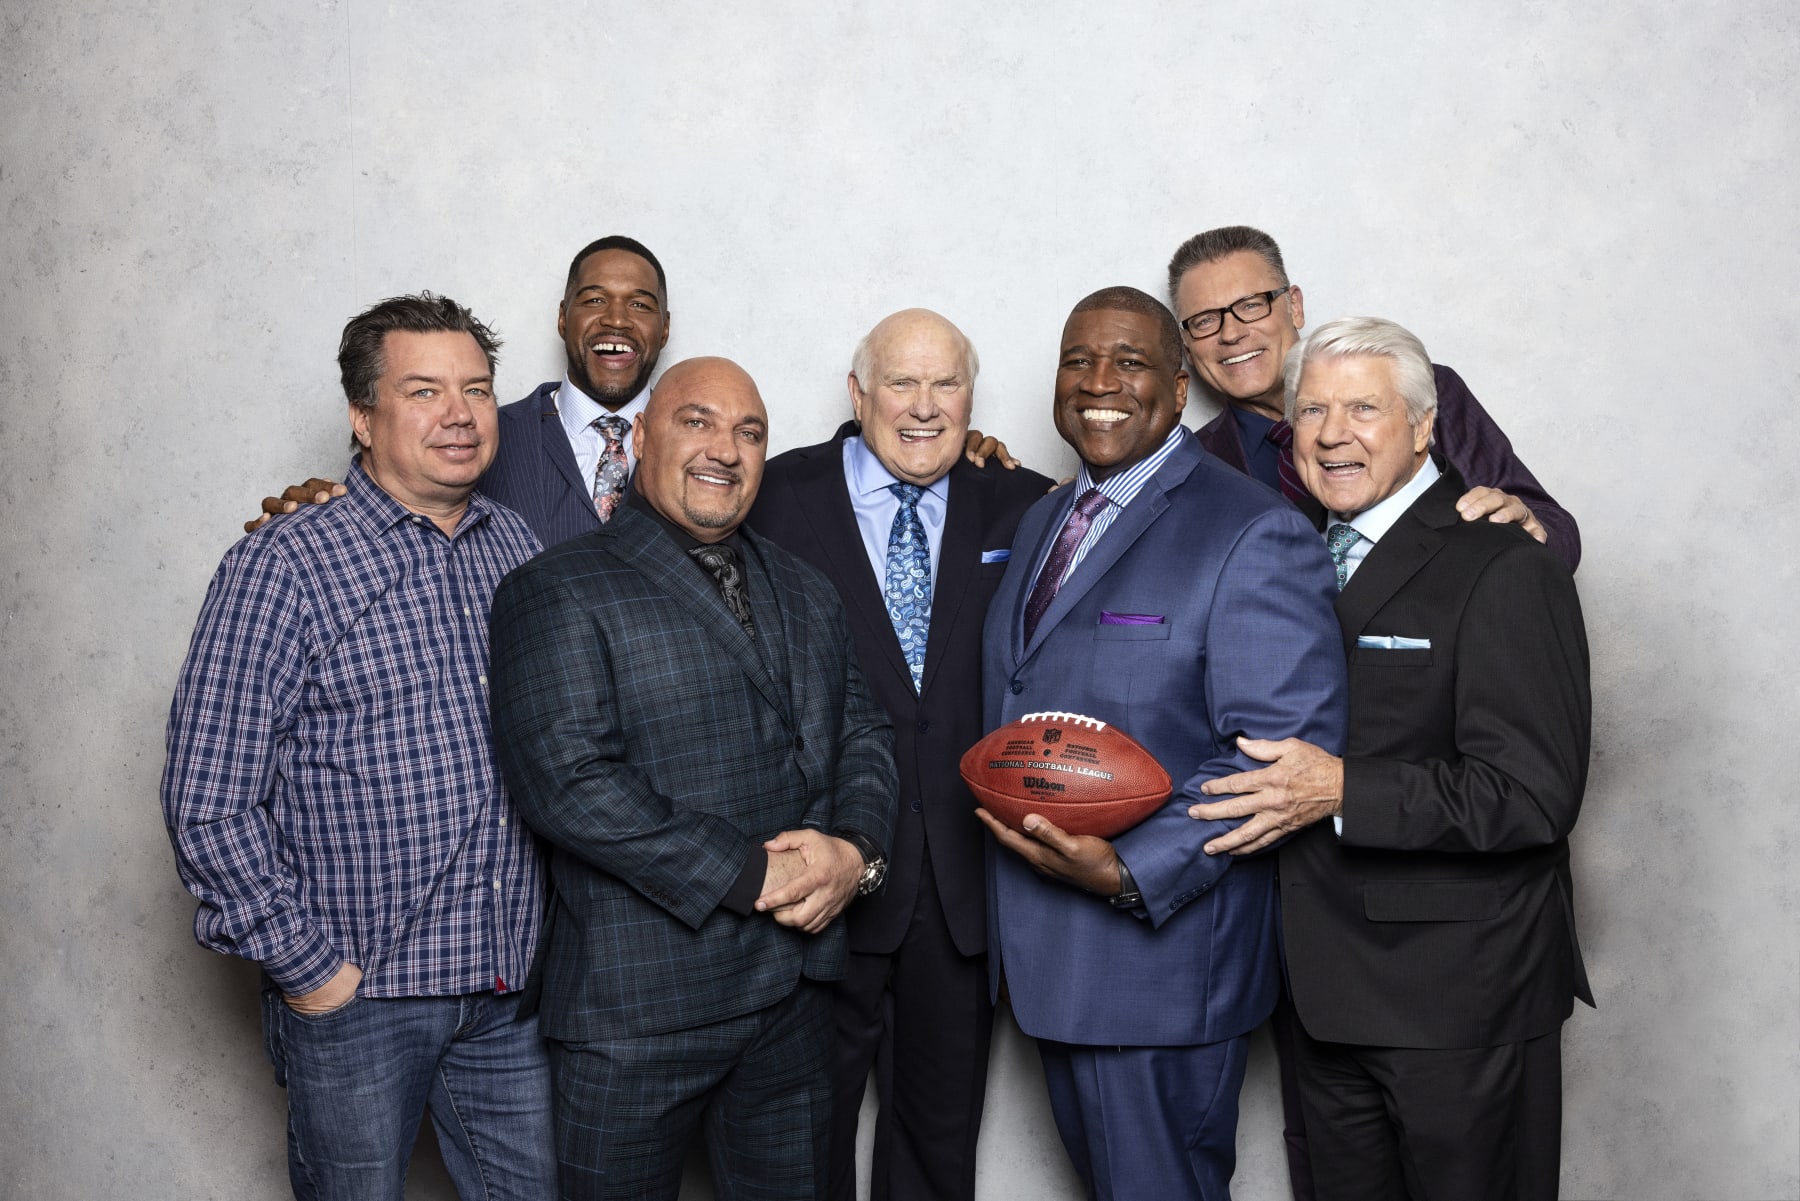 SNL Spoofs Michael Strahan, Terry Bradshaw and 'NFL on Fox' Crew